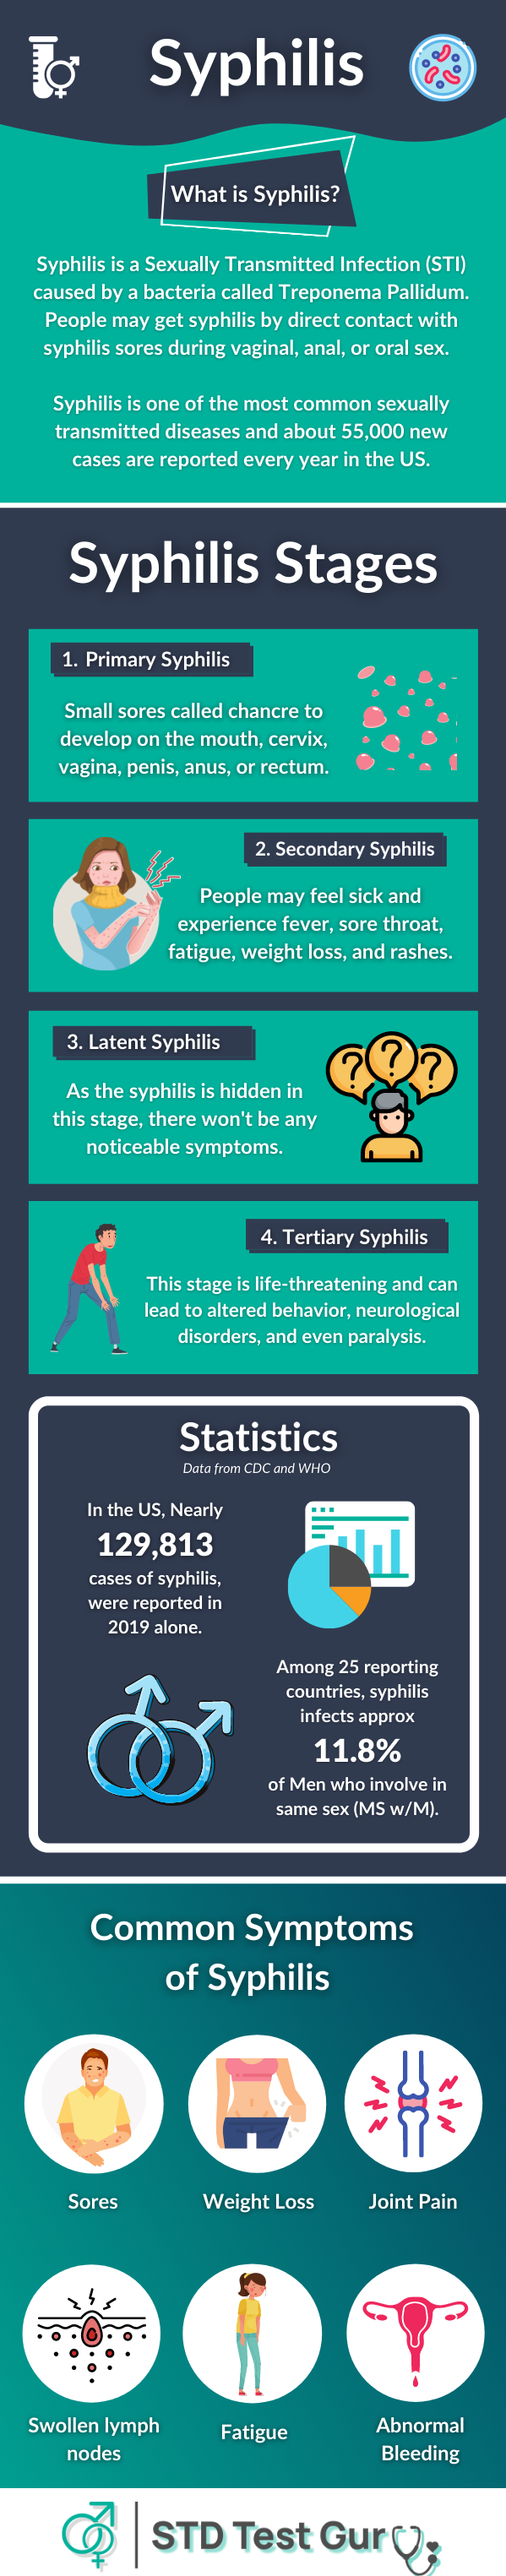 Syphilis Causes, Symptoms, Stages and Testing Options